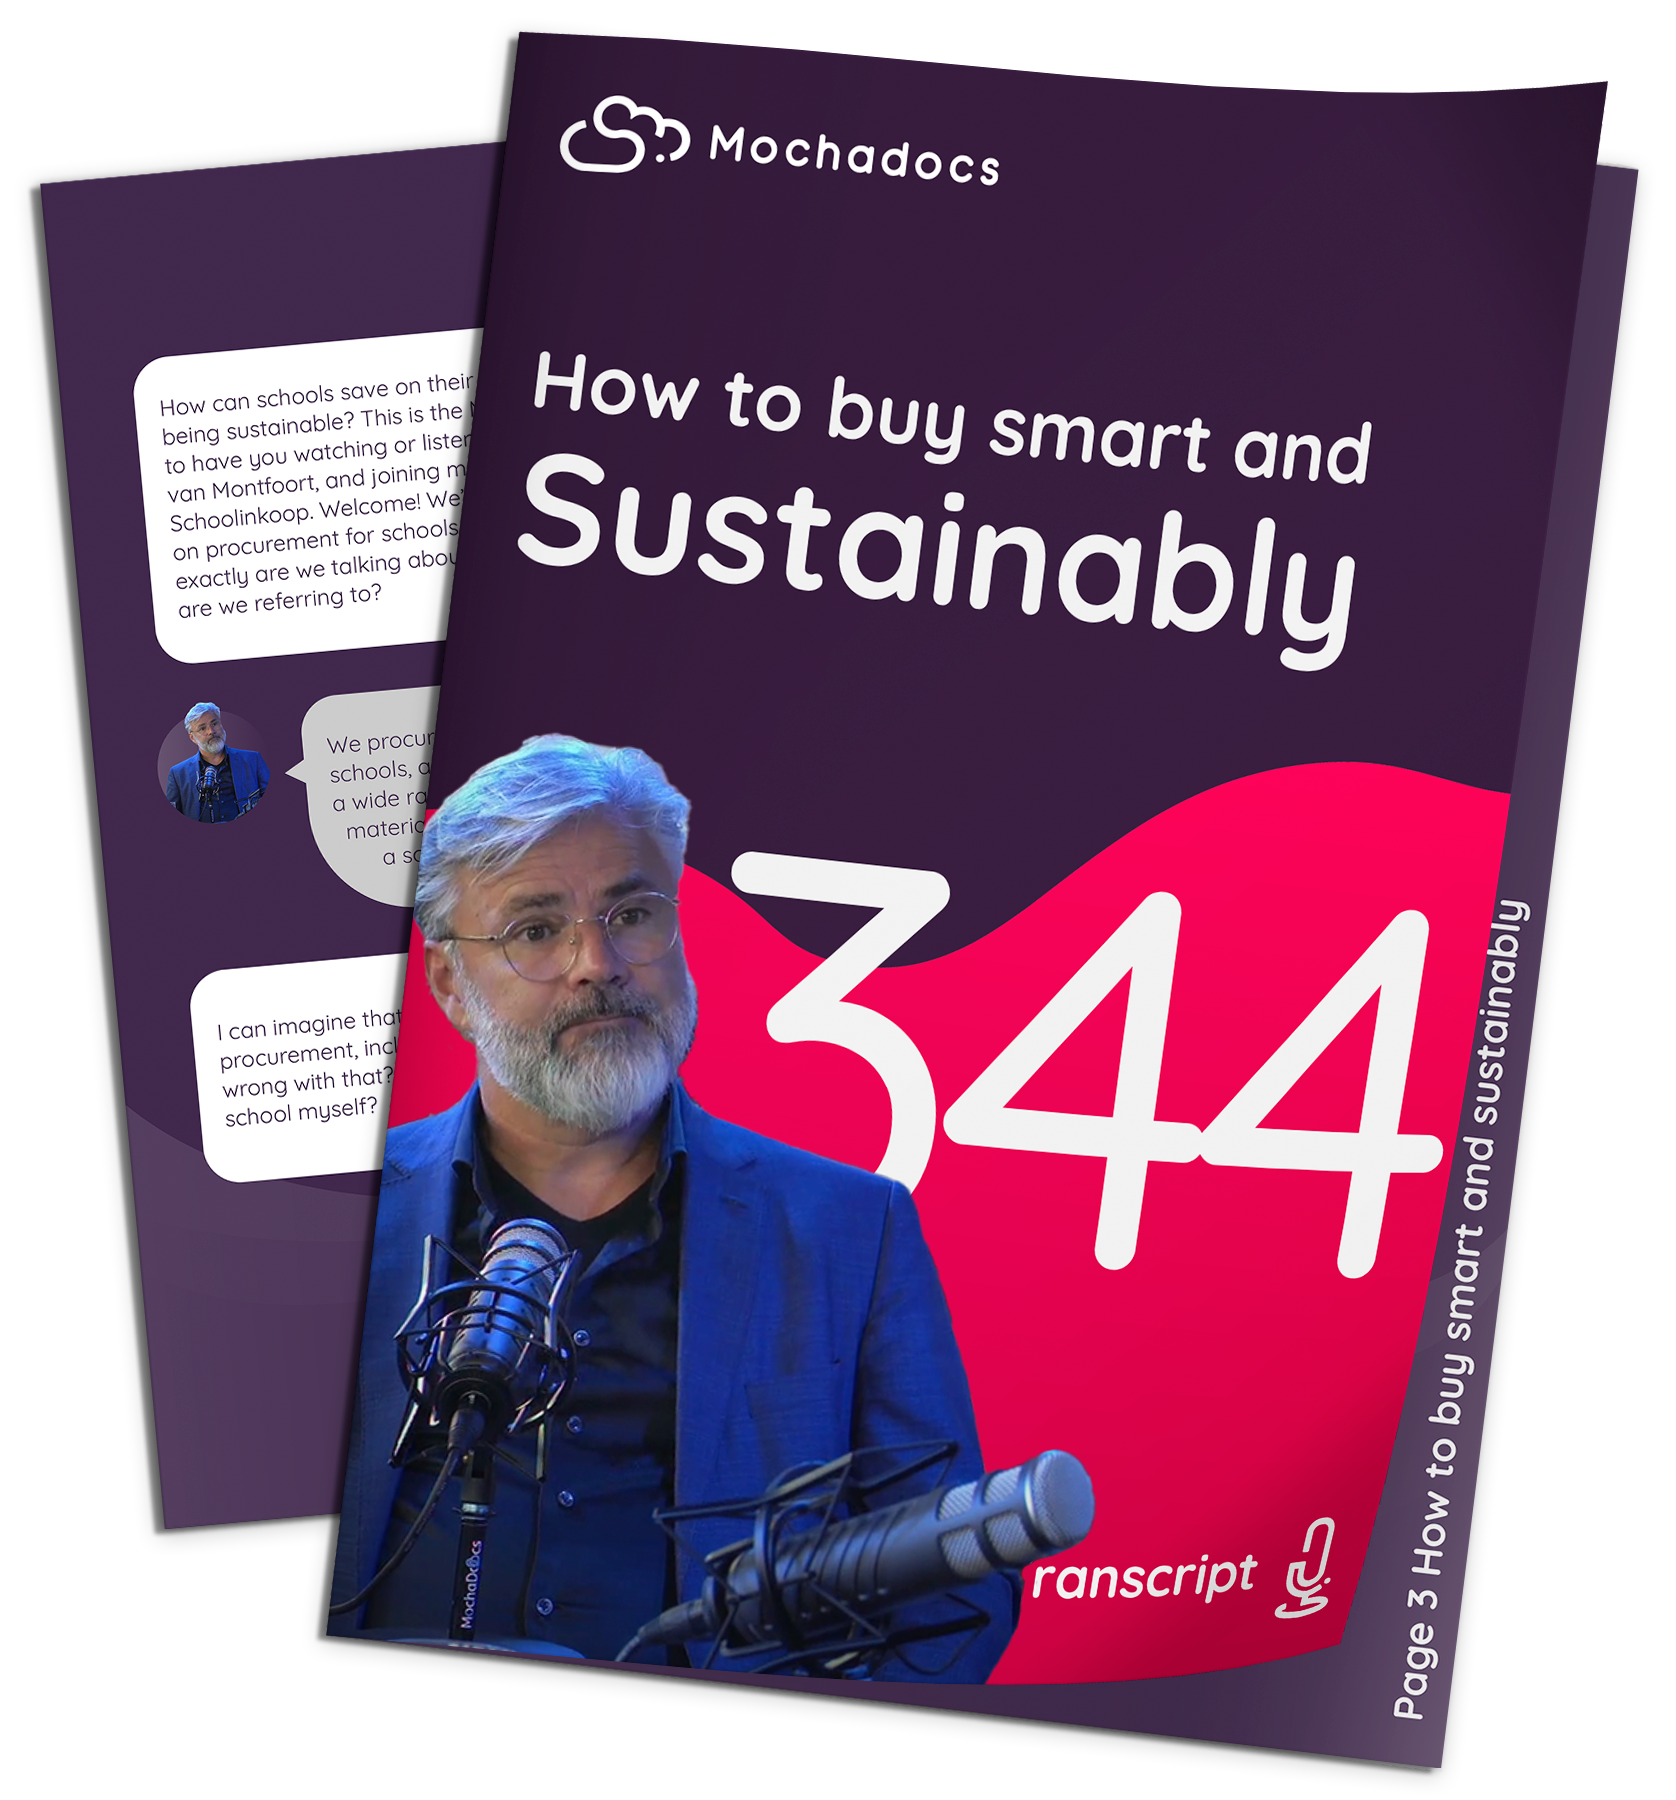 How to buy smart and sustainably